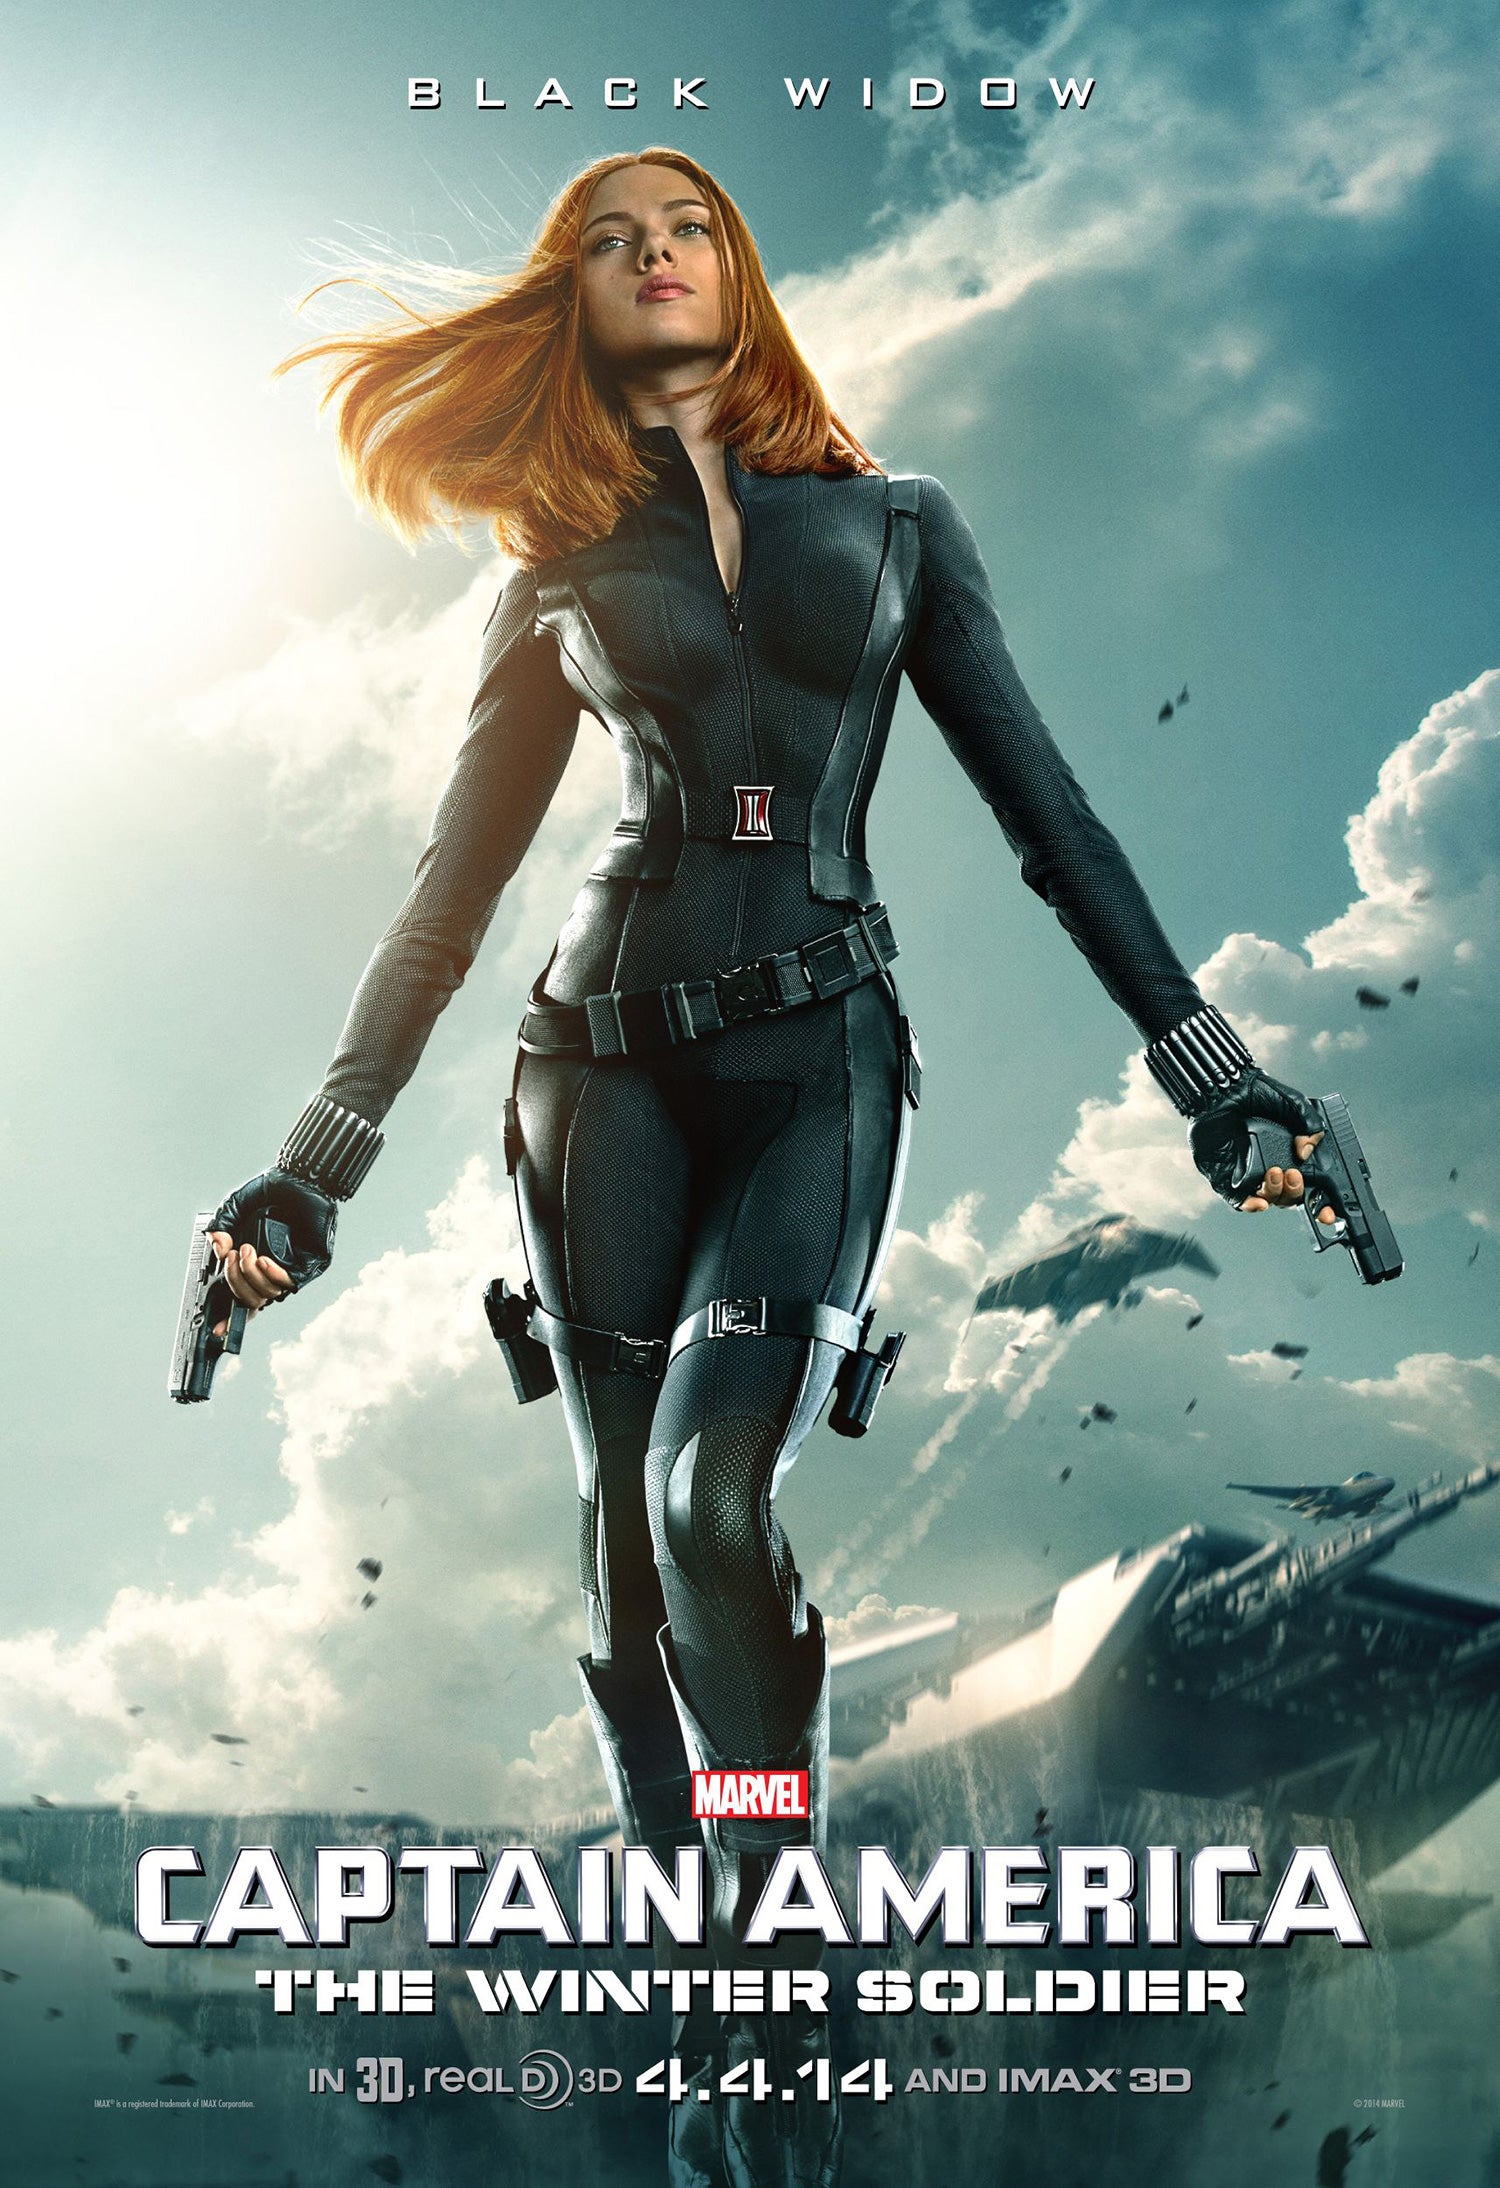 adam j lane recommends sexy pictures of black widow pic